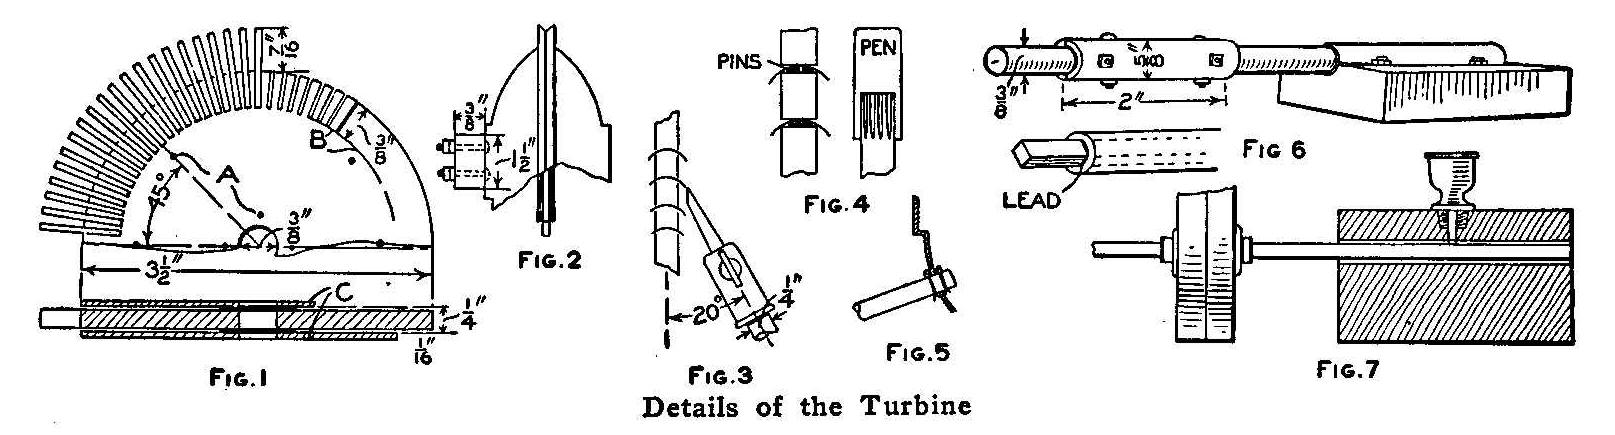 Details of the Turbine